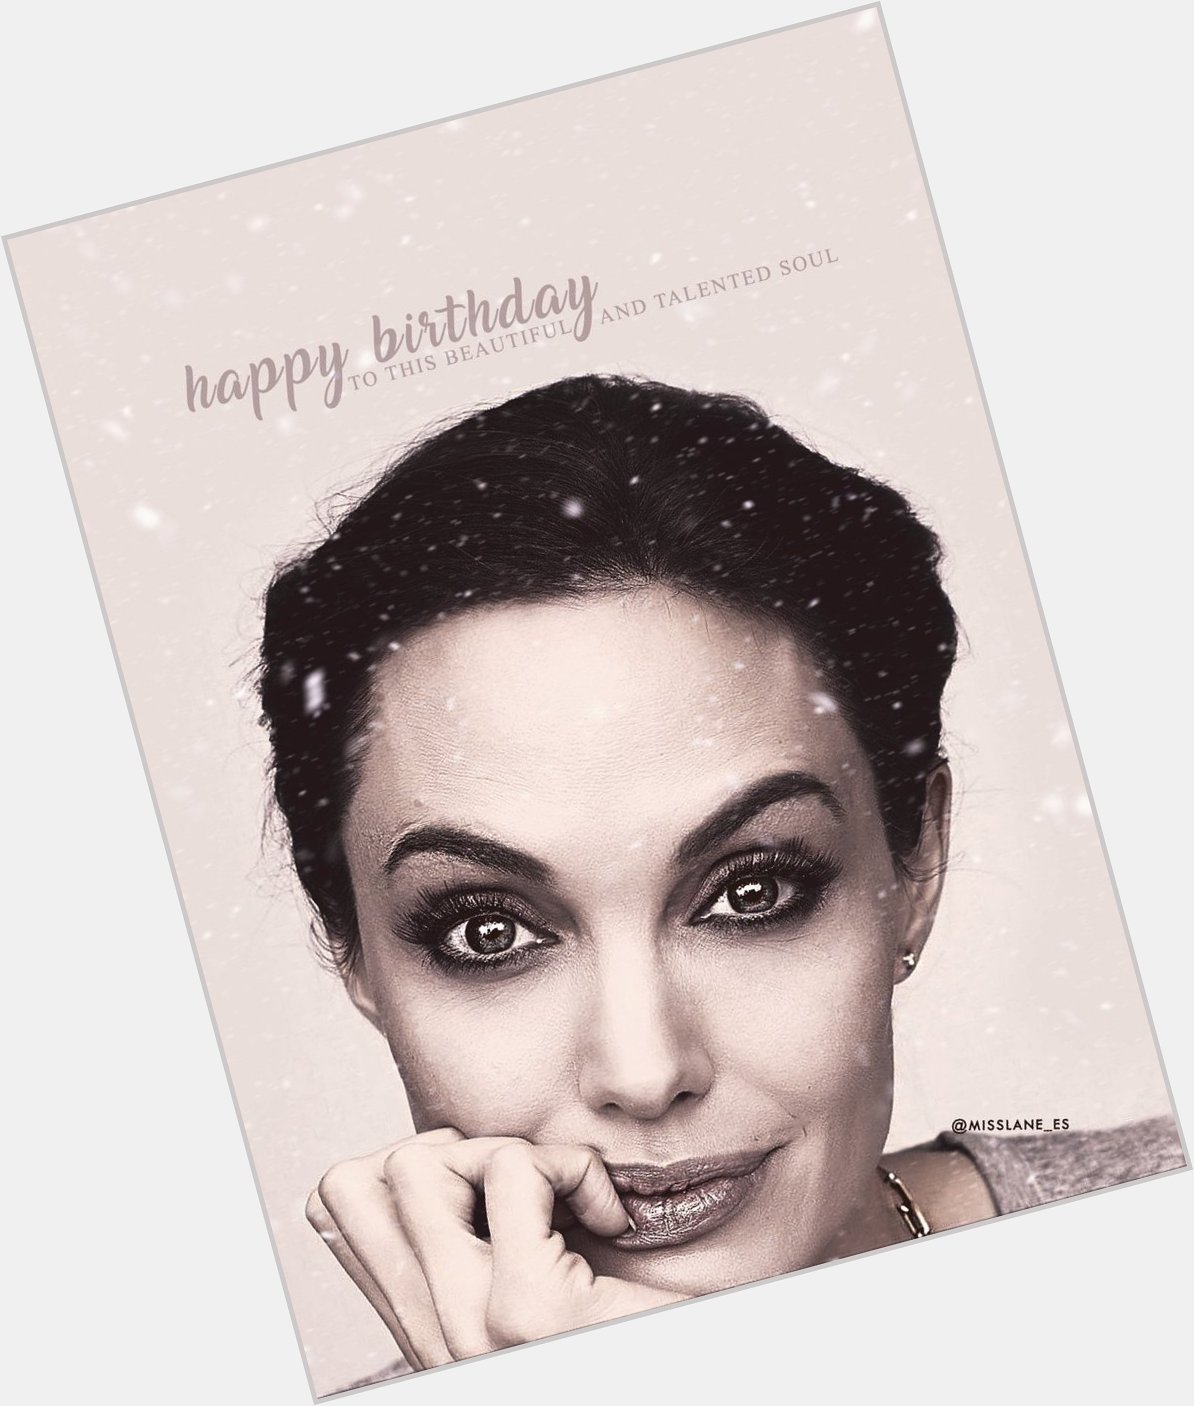 Happy birthday to Angelina Jolie 
Talented and beautiful human being   